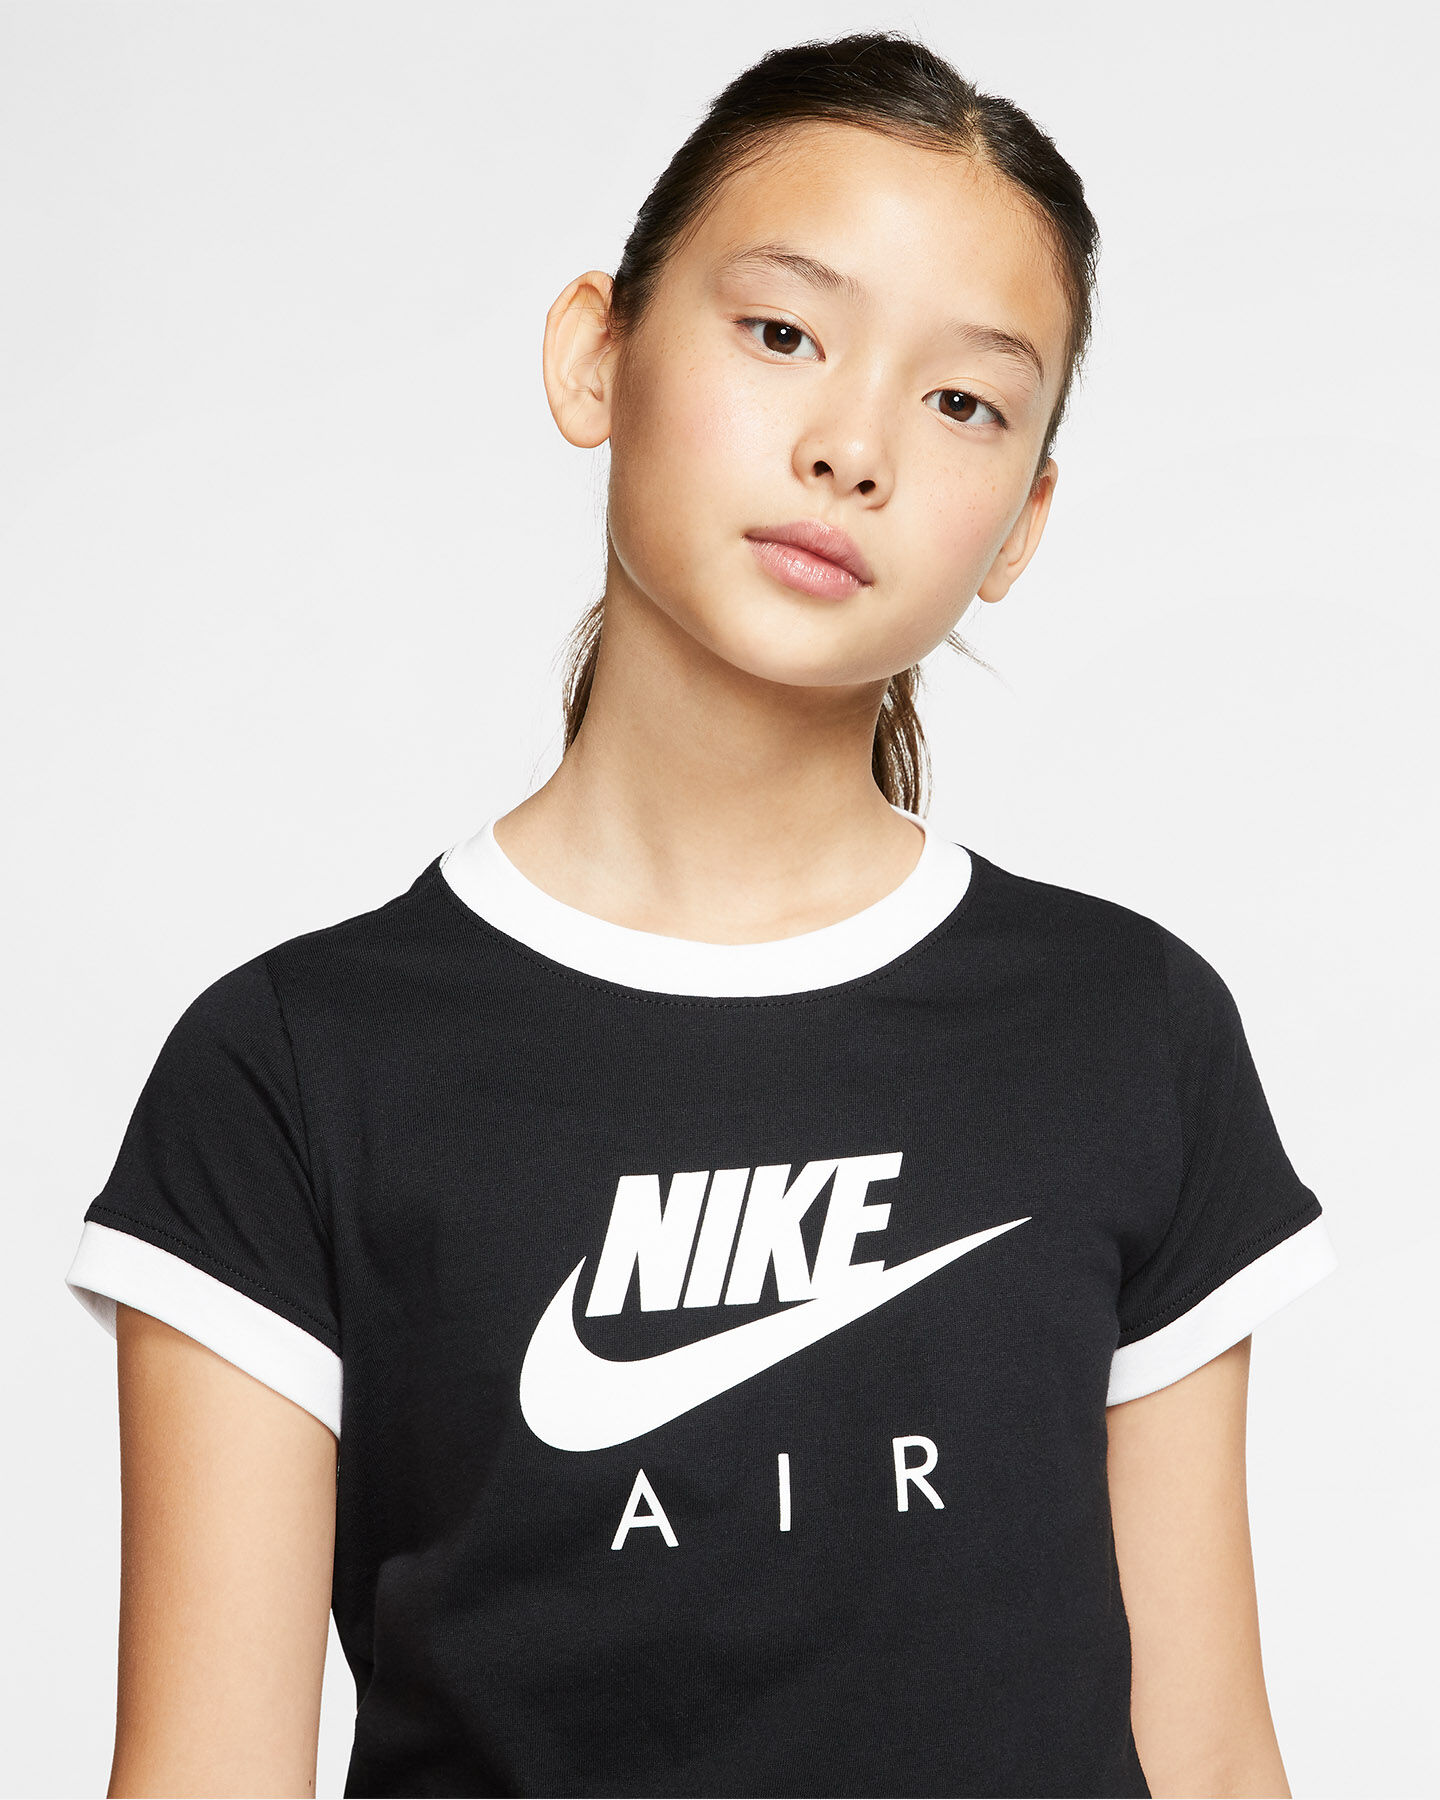  T-Shirt NIKE AIR JR S5163912|011|S scatto 4